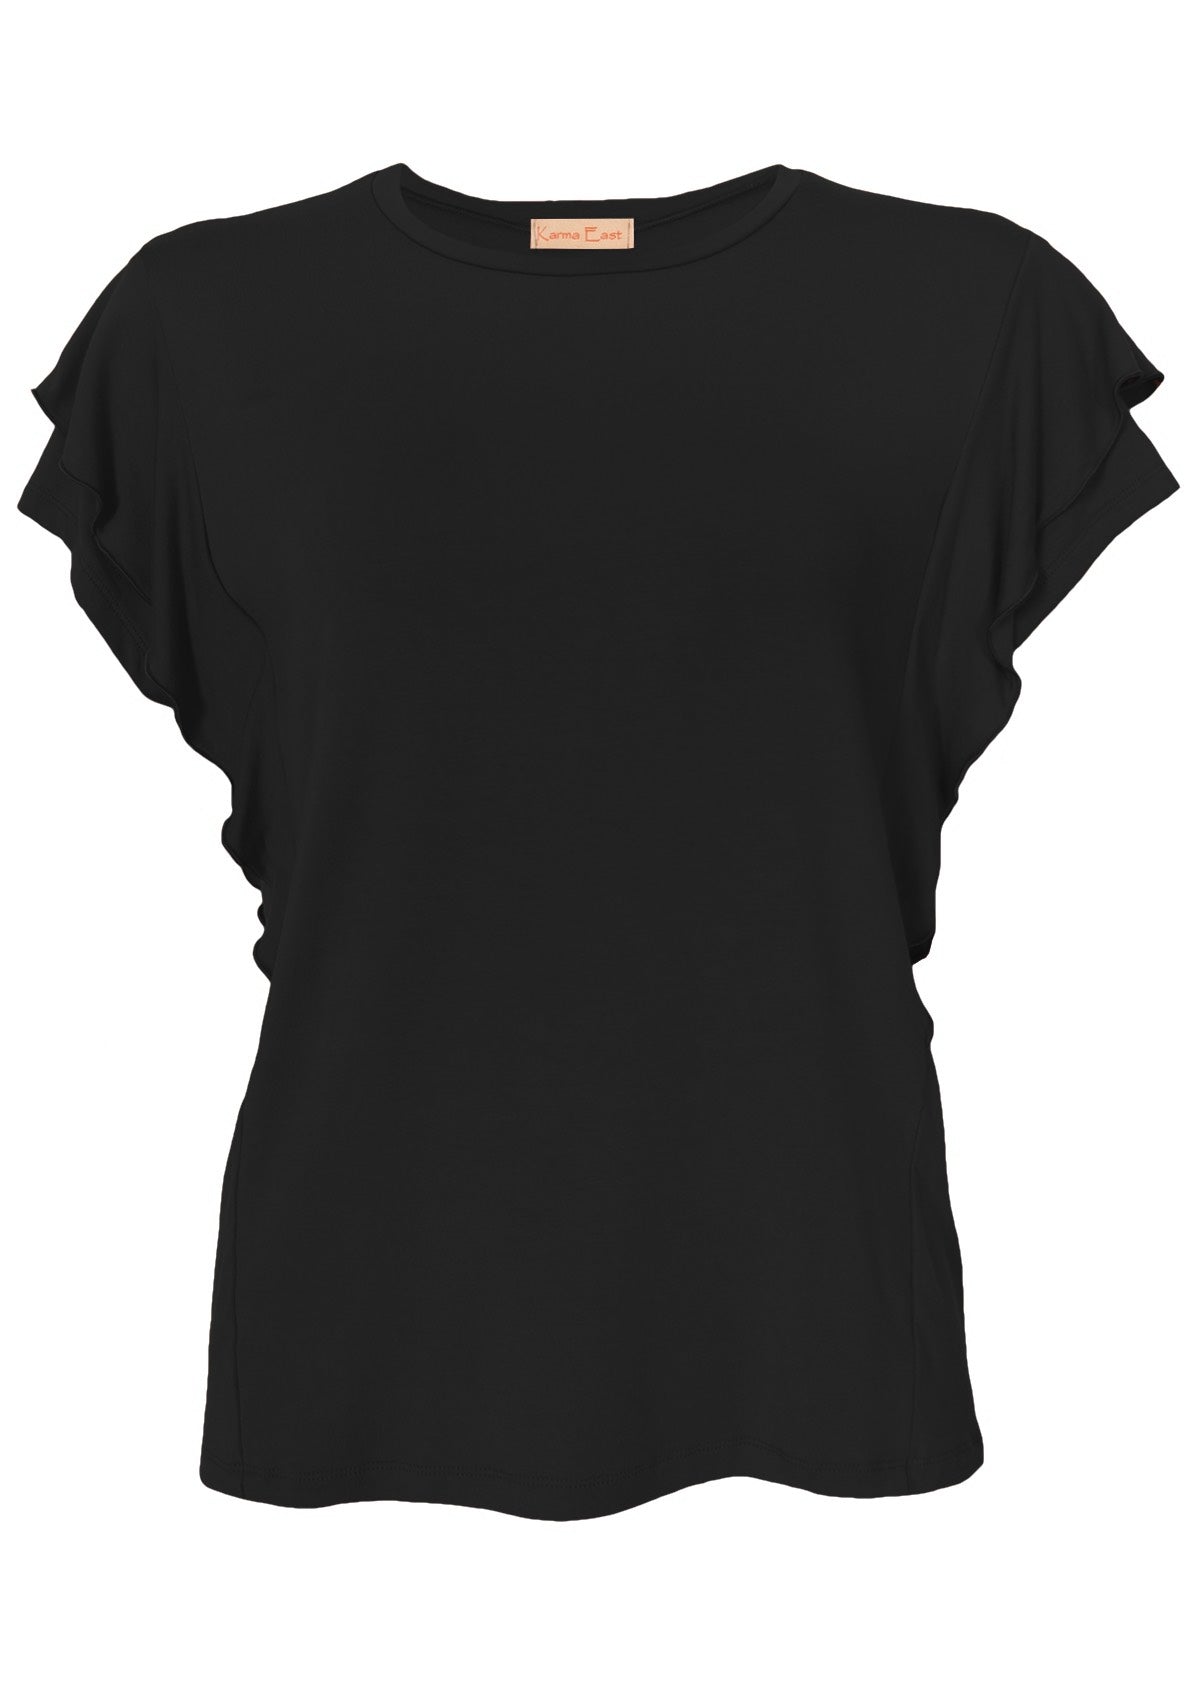 Front view of a women's basic black ruffle top over white background. 